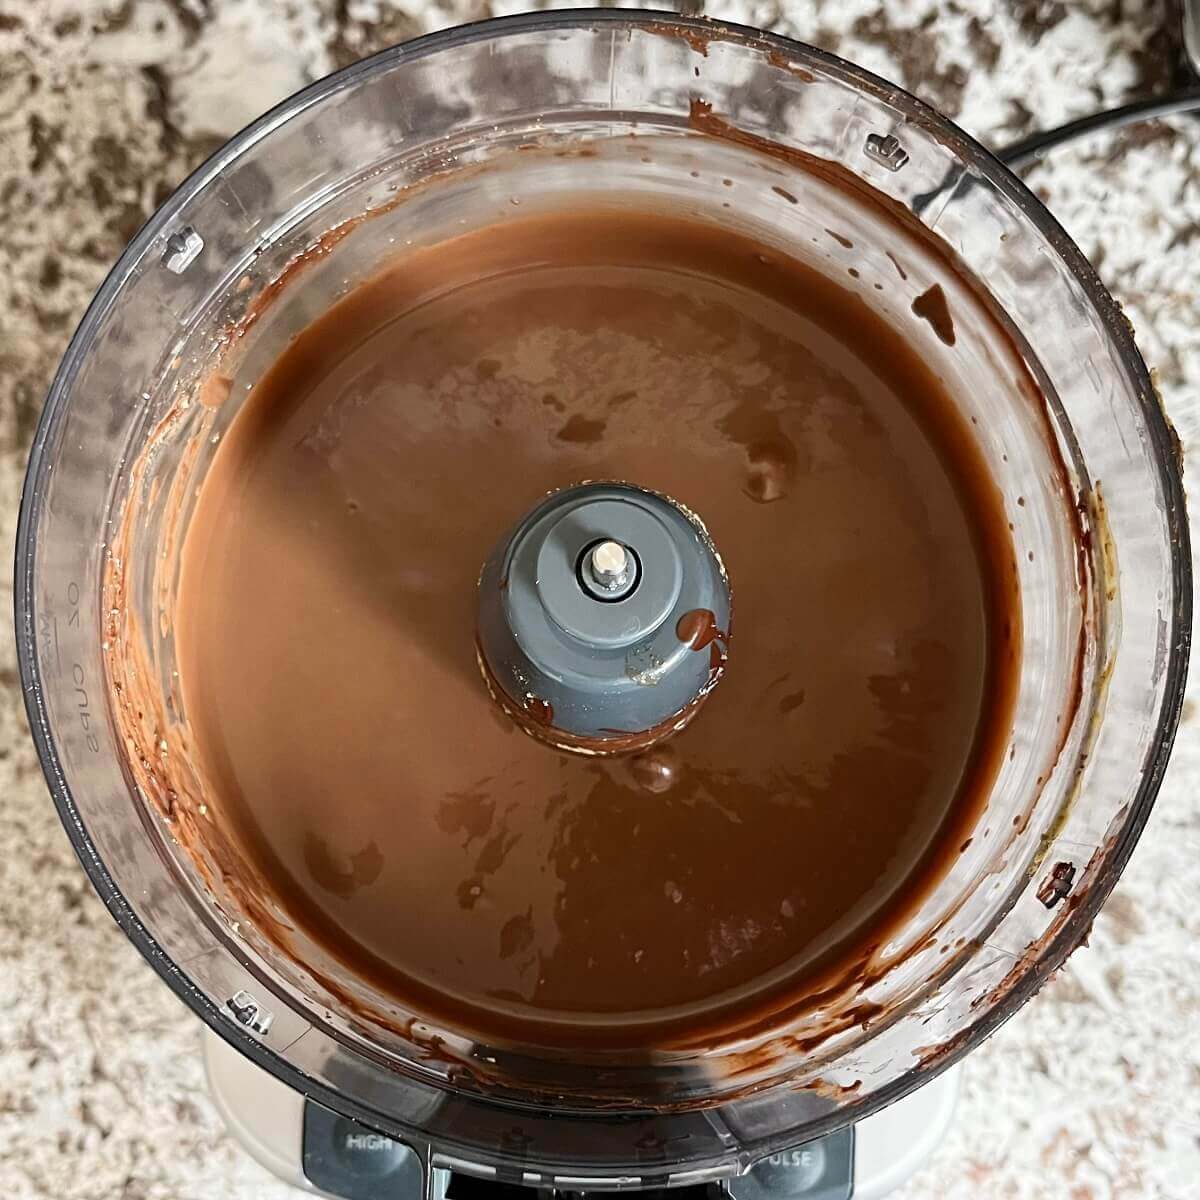 Blended chocolate mousse in a food processor.